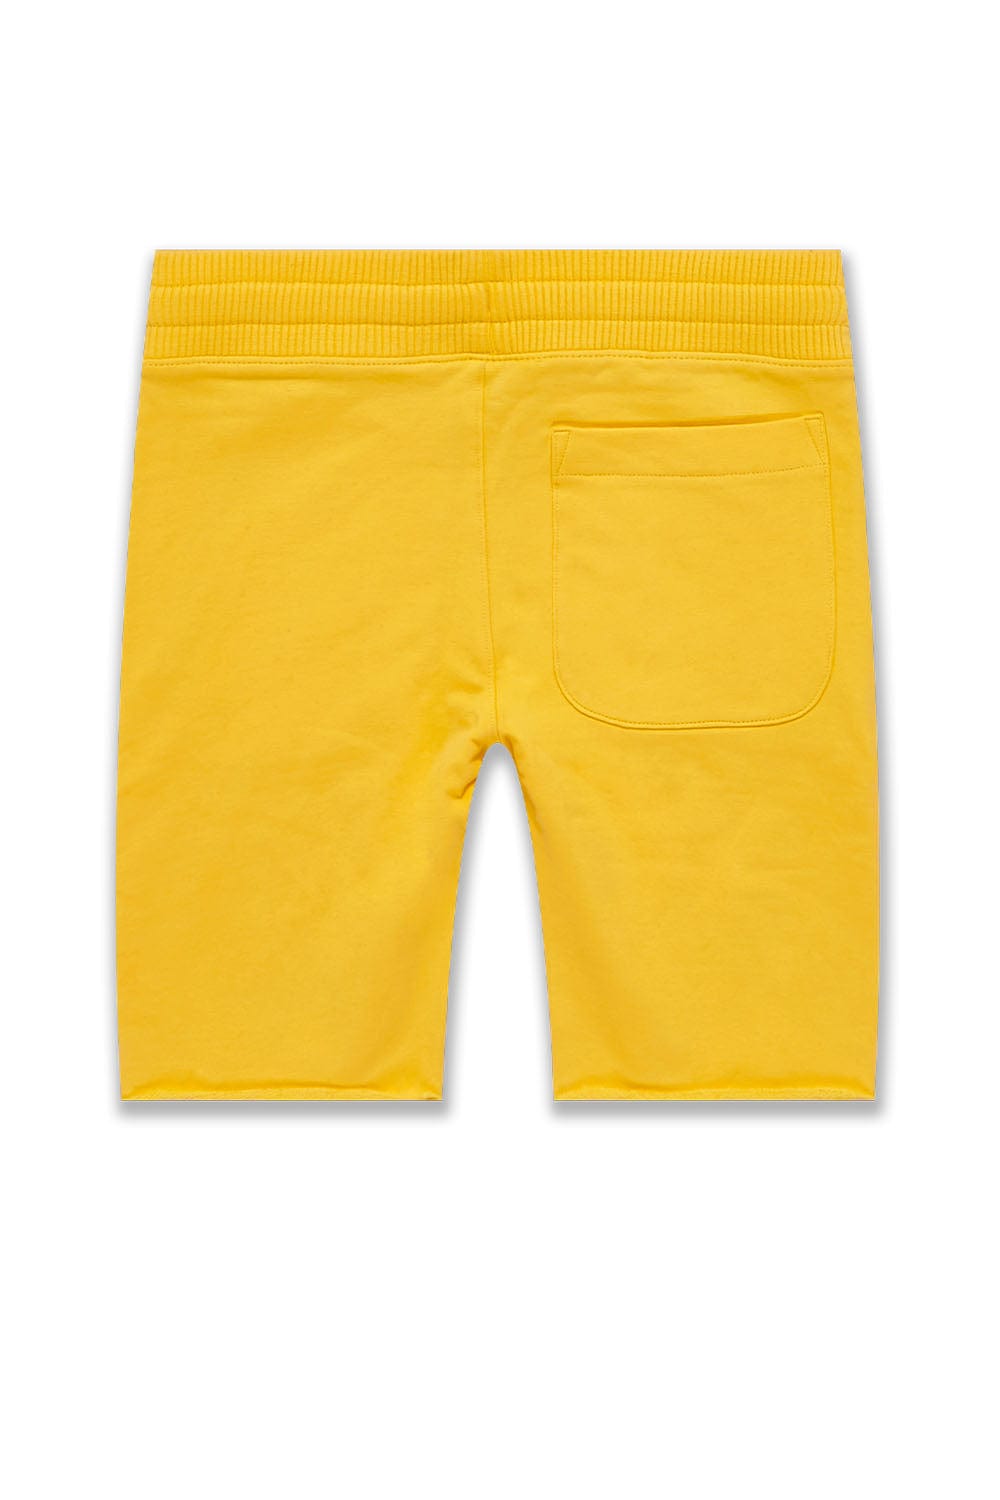 JC Kids Kids Palma French Terry Shorts (Exclusive) (Memorial Day Markdown)